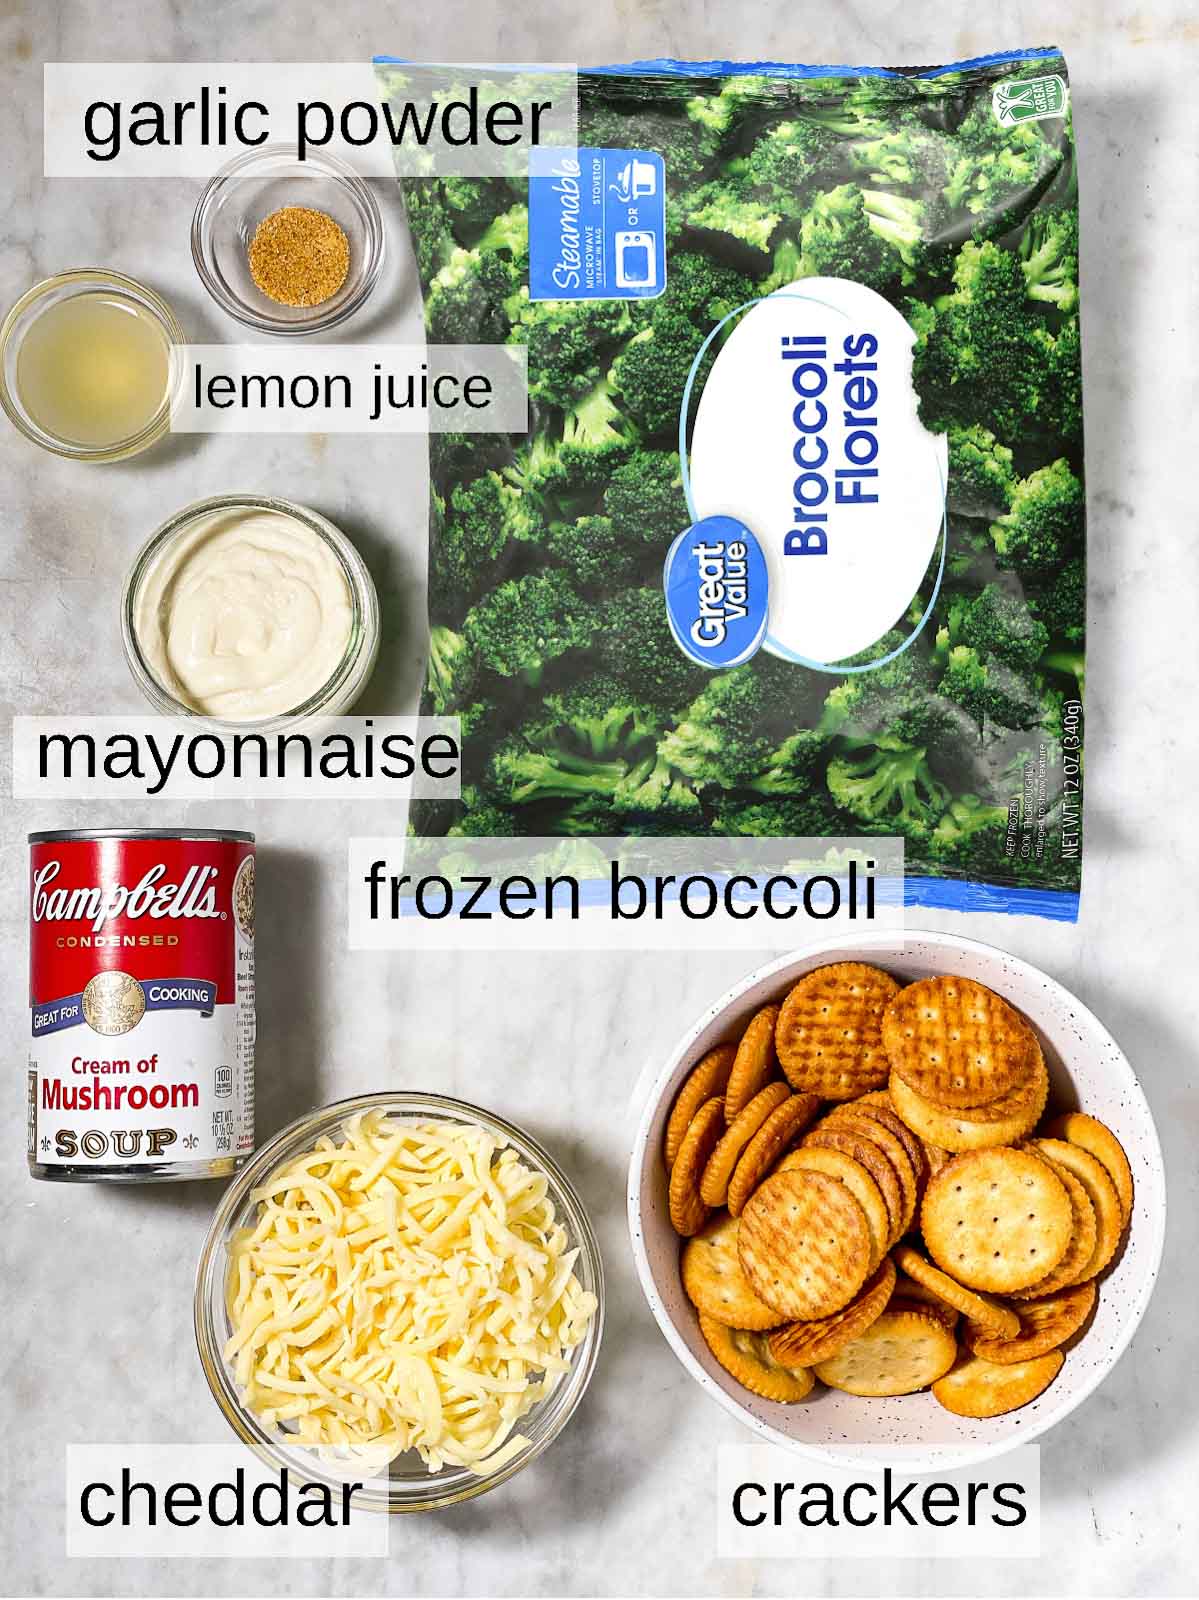 ingredients for ritz broccoli casserole with text labels